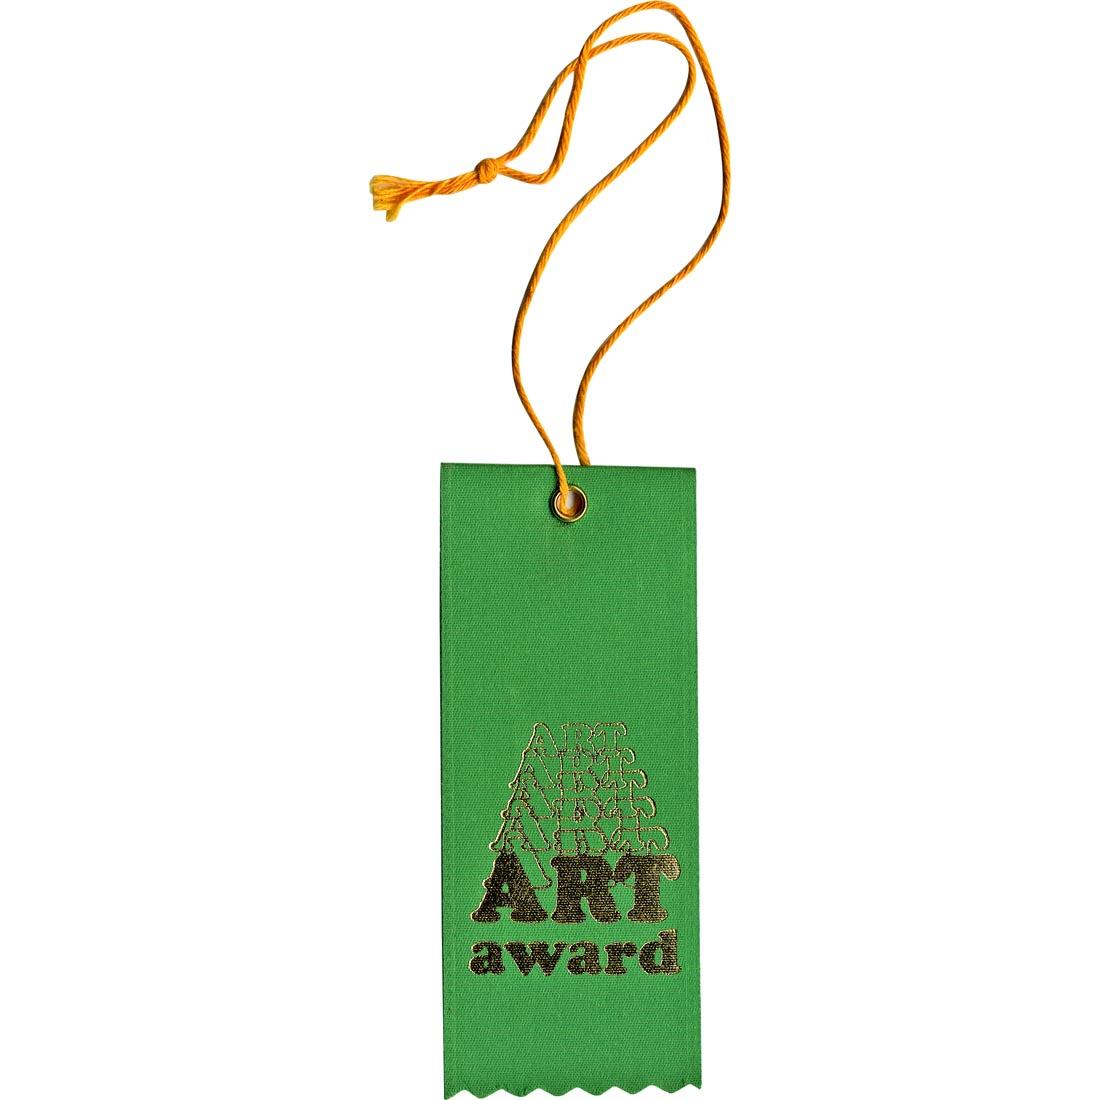 short green Art Award ribbon with a string for hanging